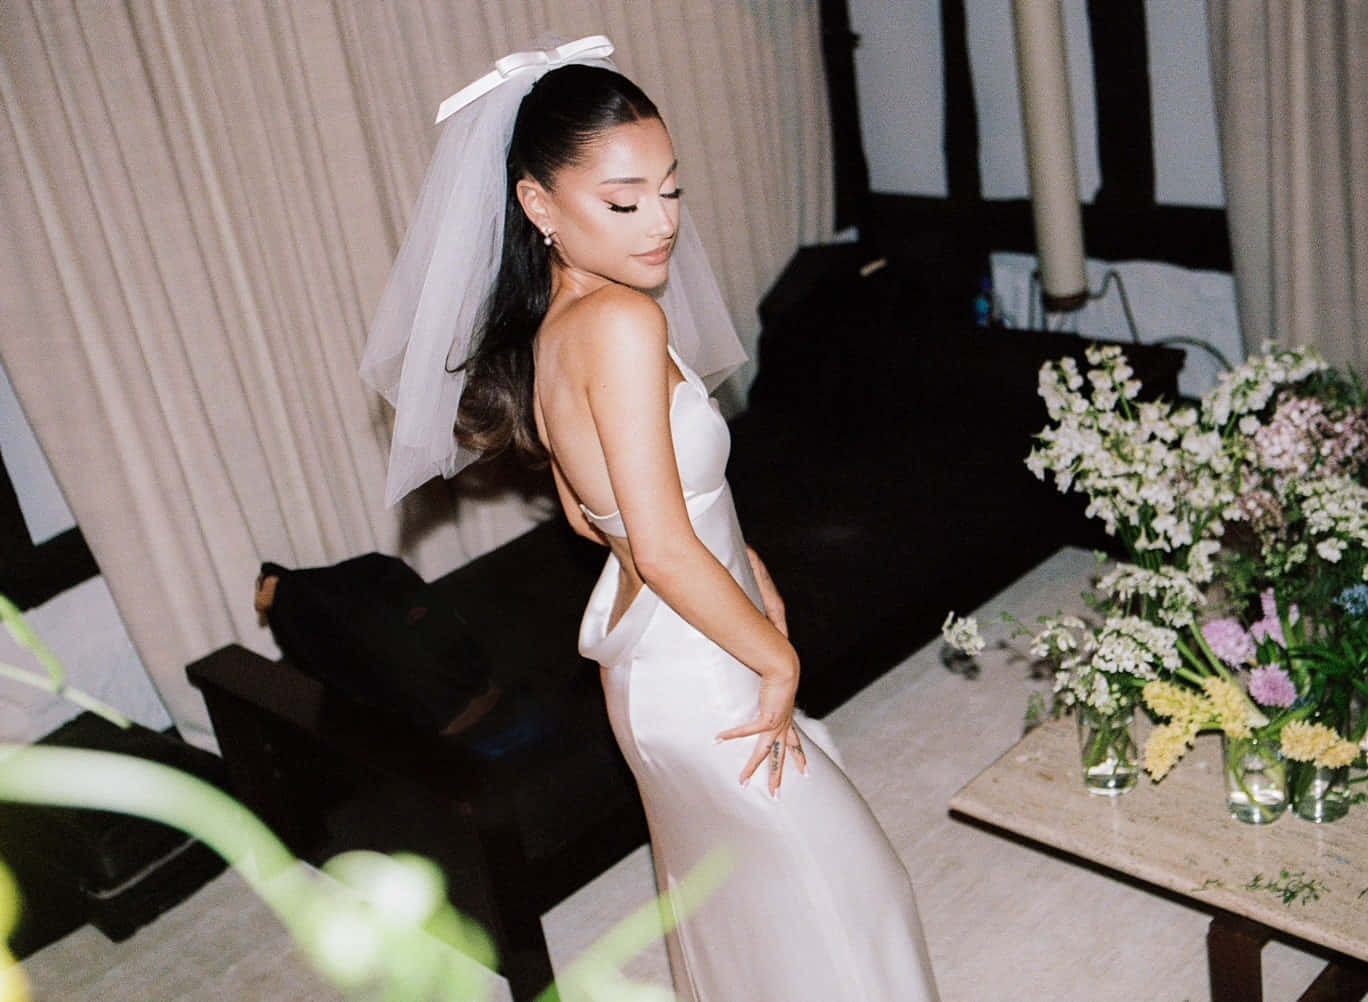 Ariana Grande Donning Her Wedding Dress Picture